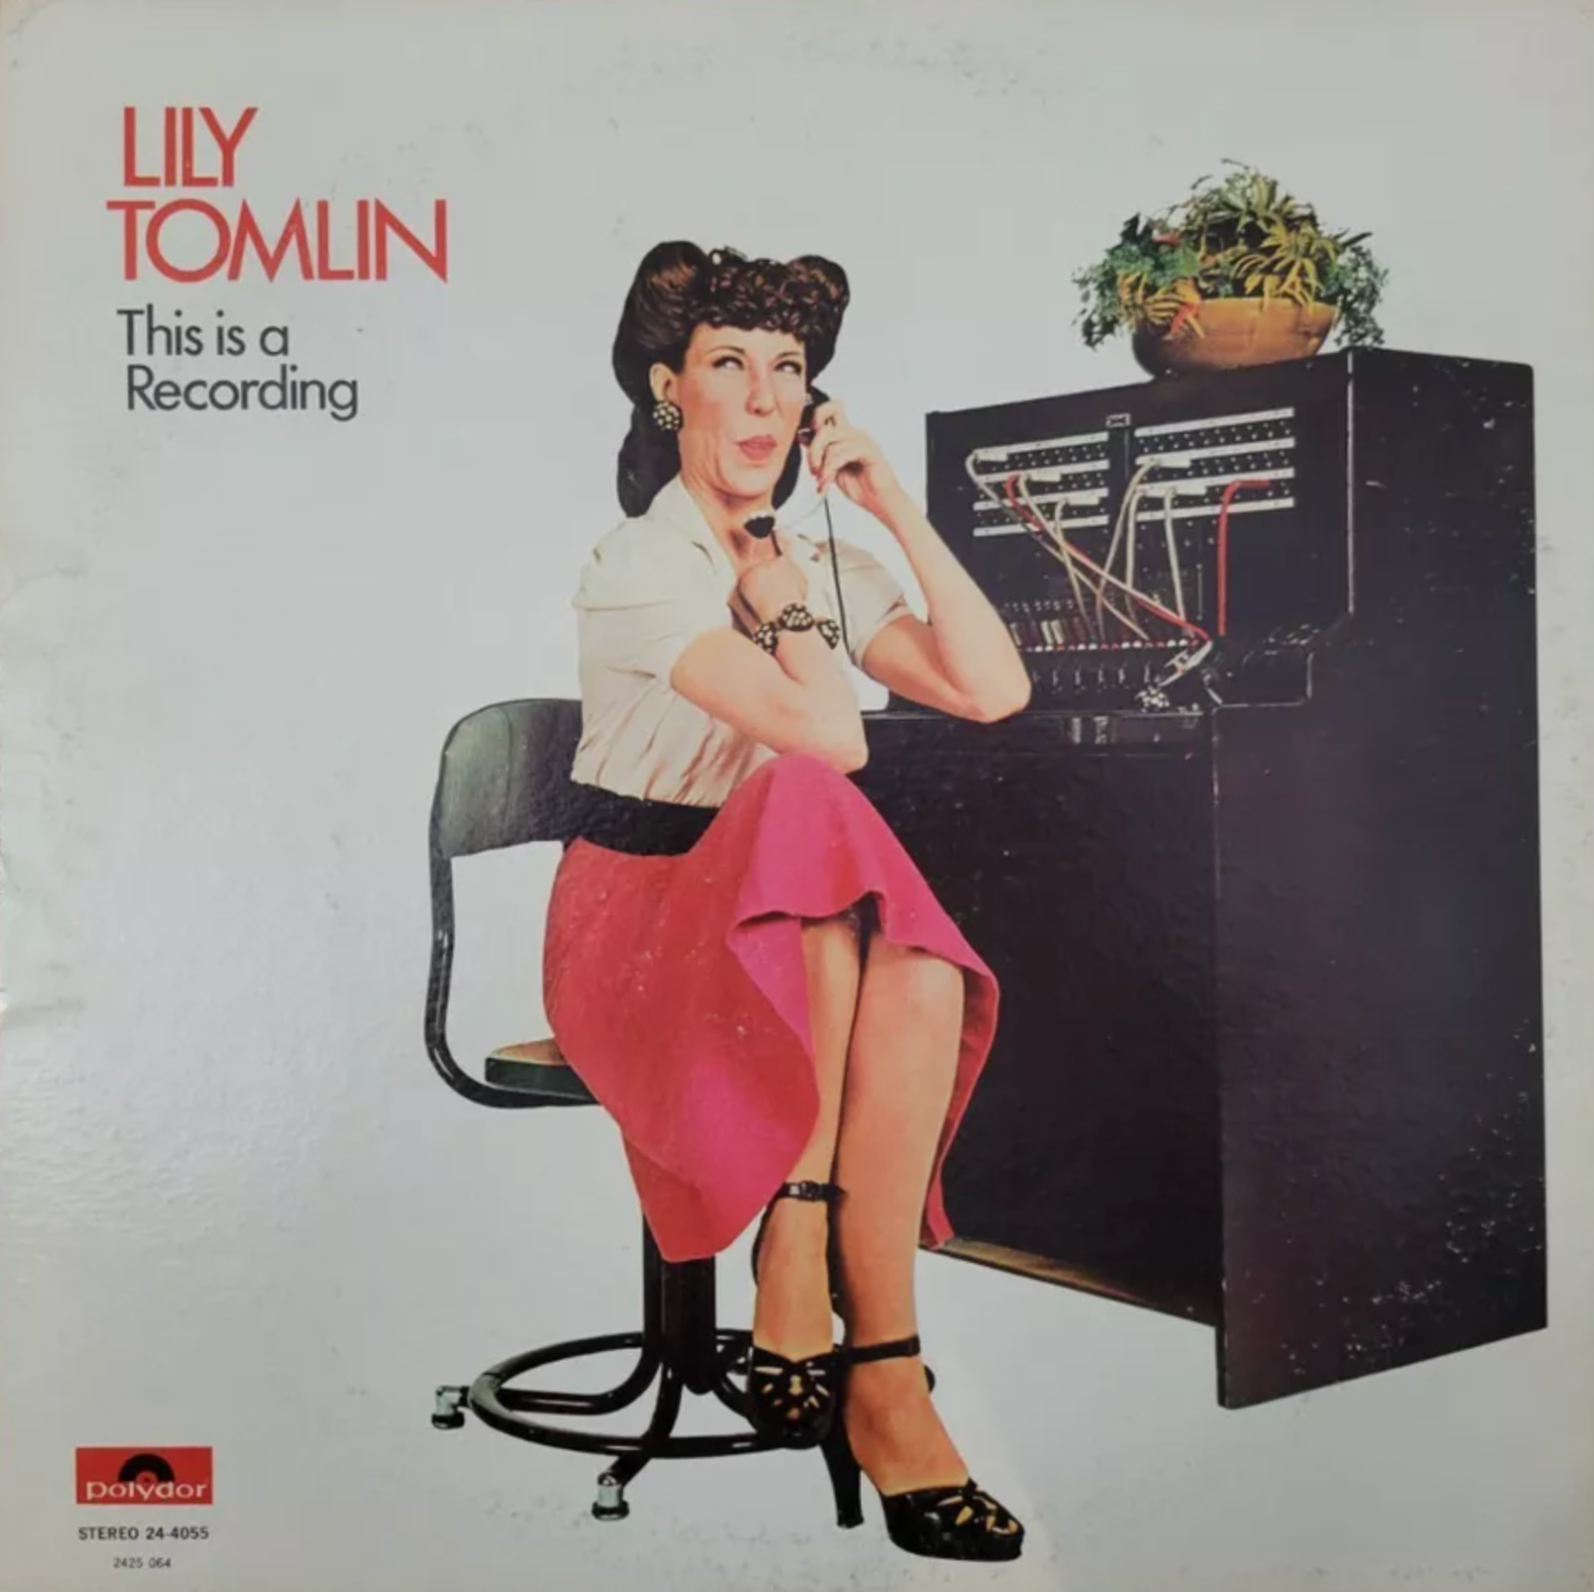 Lily Tomlin's "This Is A Recording"